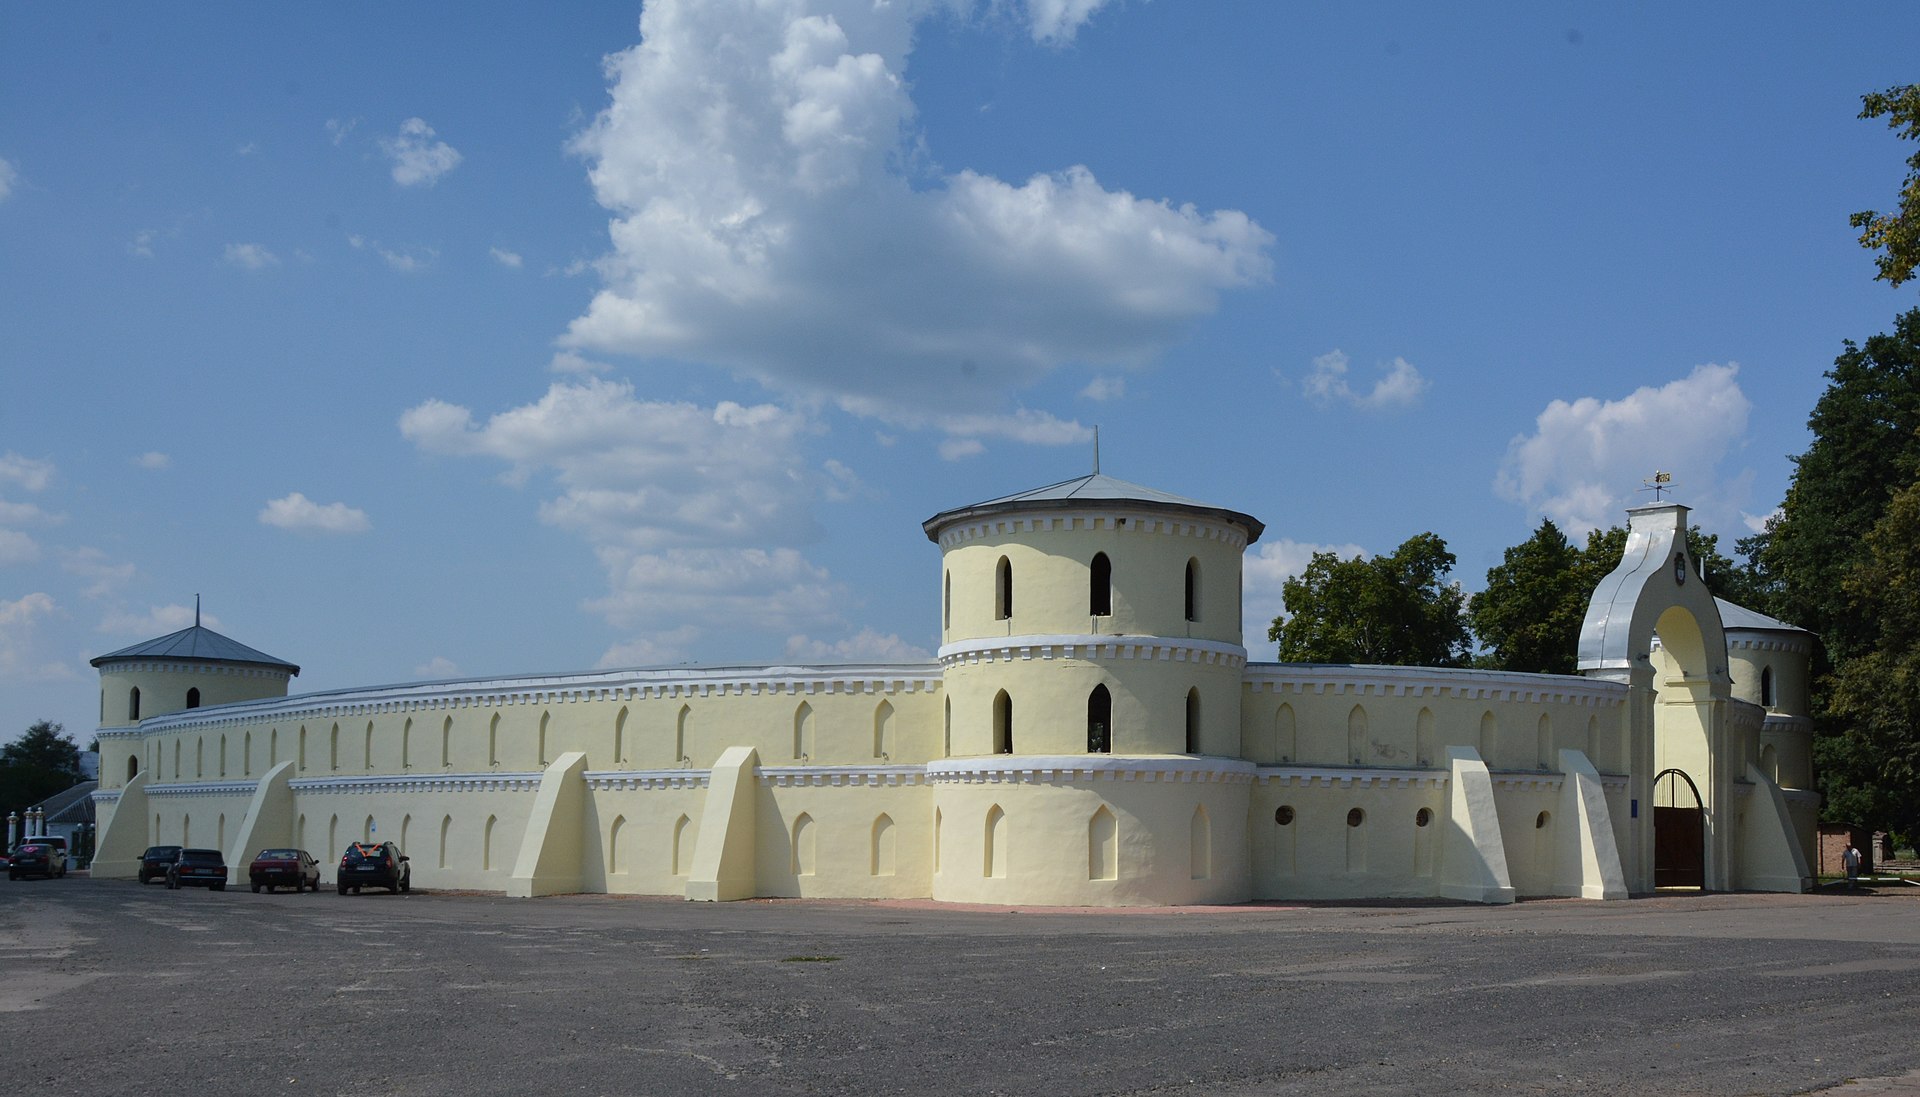 The Round Yard, A fortress of the XVIII century